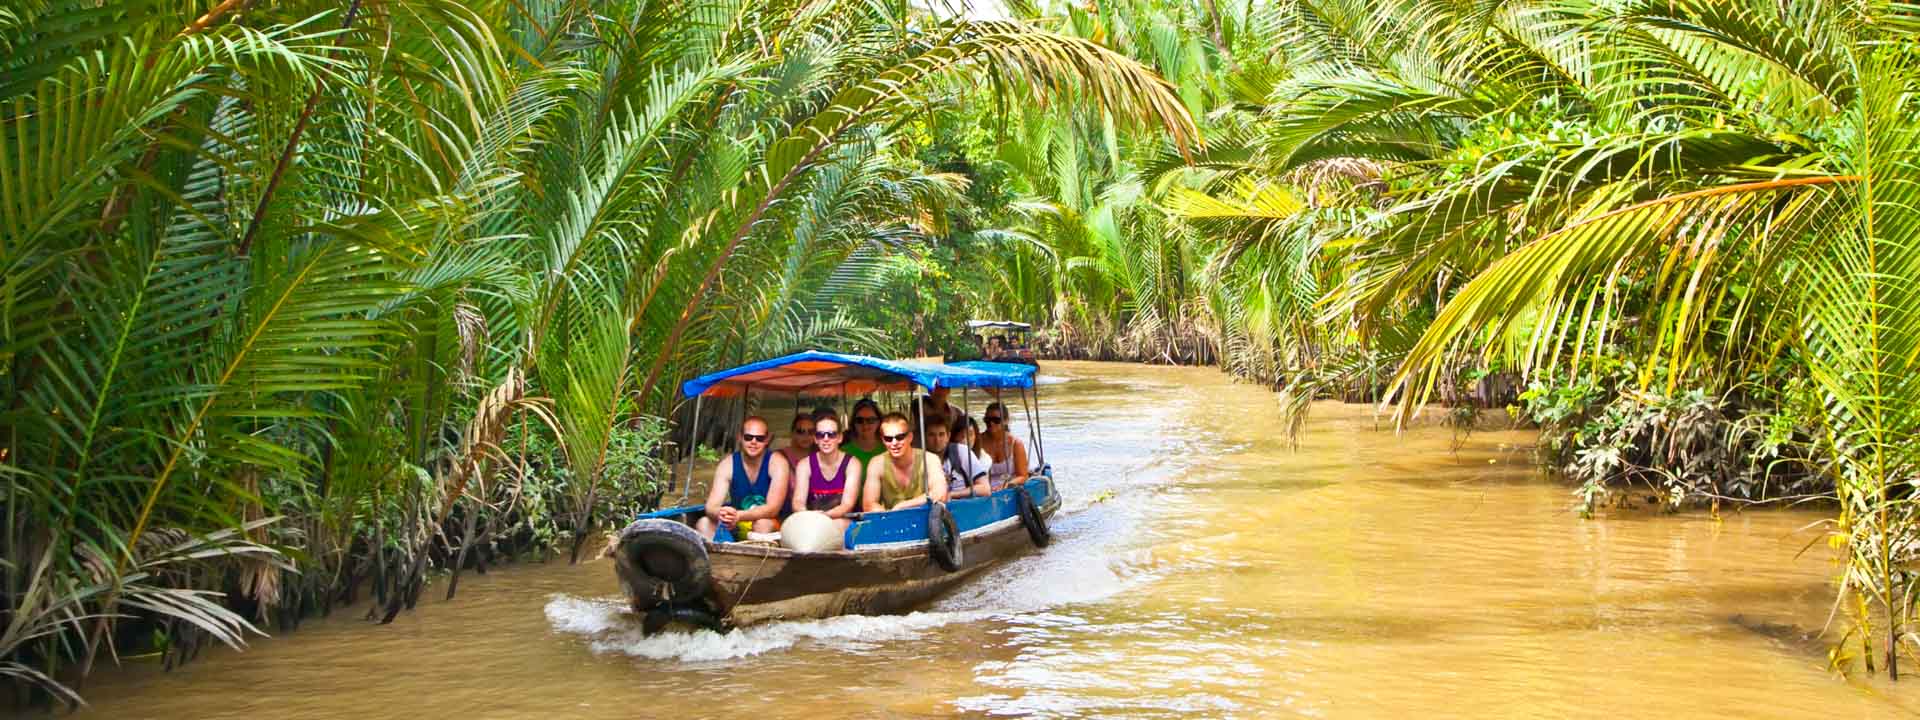 Experience Mekong Delta once in a life time 3 days